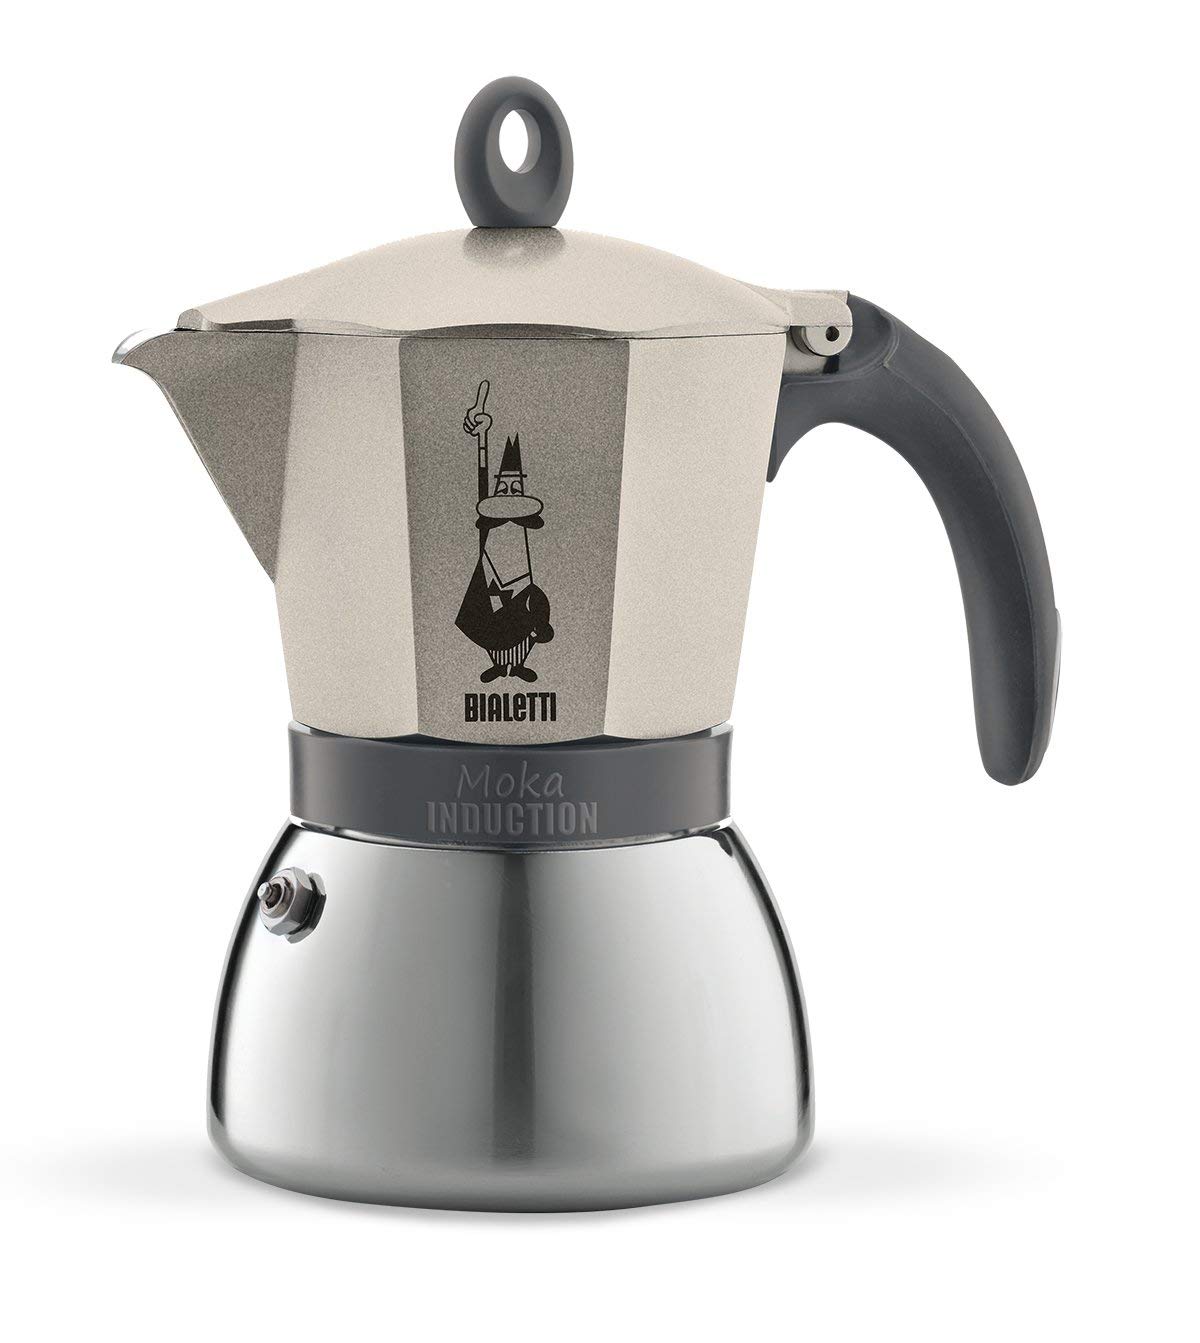 Bialetti Stainless Steel/ Aluminium Moka Induction, Gold (6 Cup)